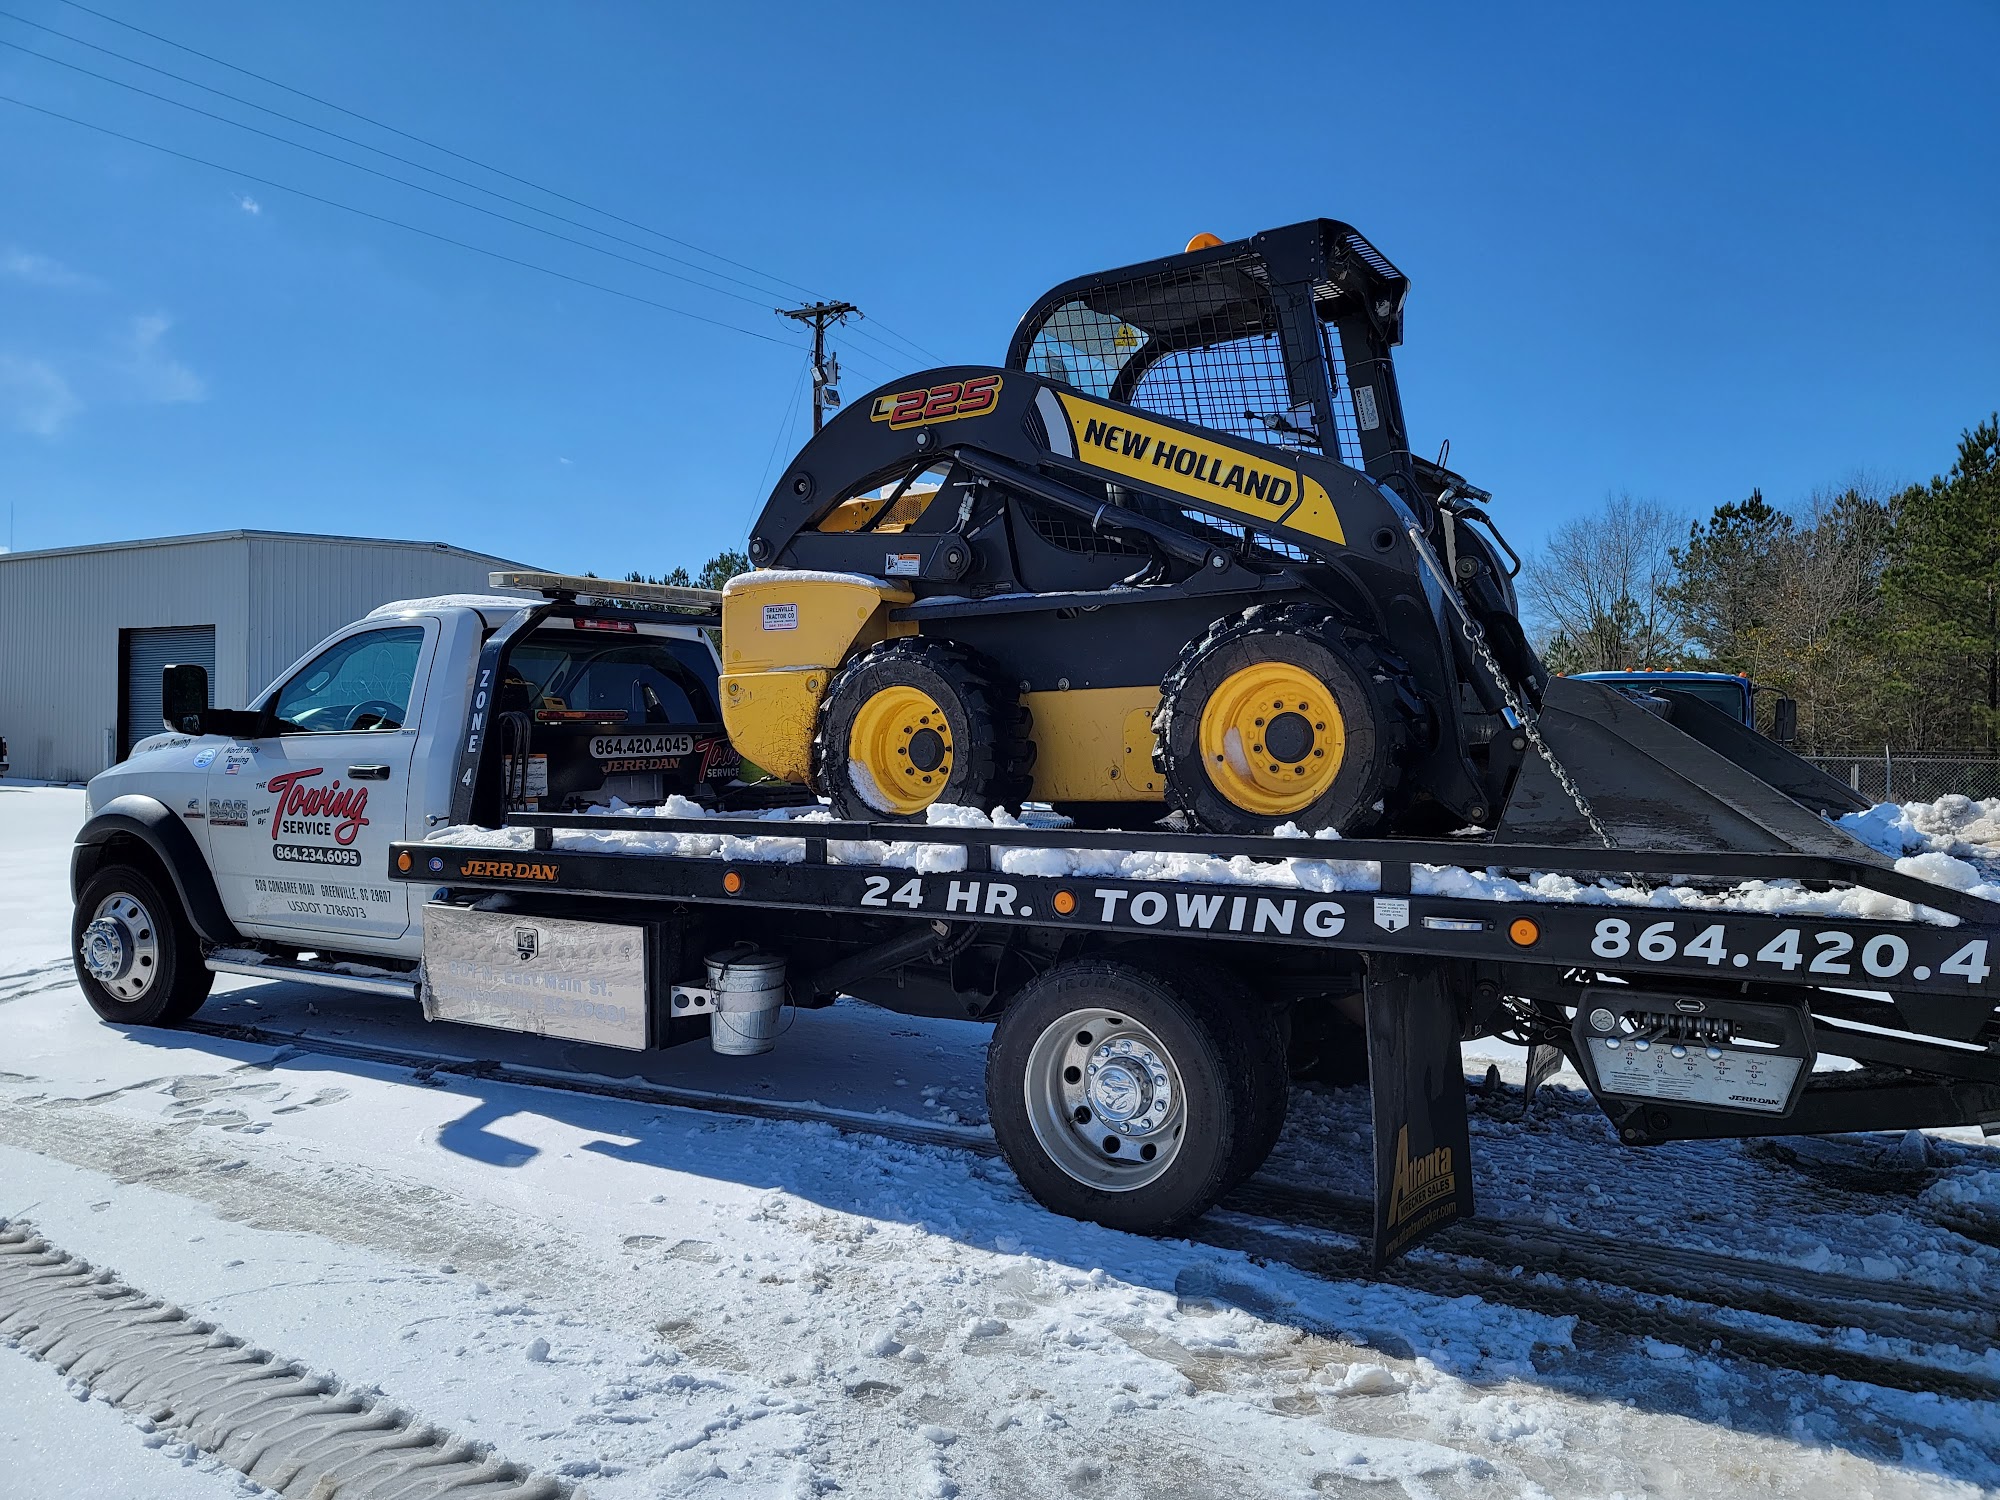 The Towing Service, LLC